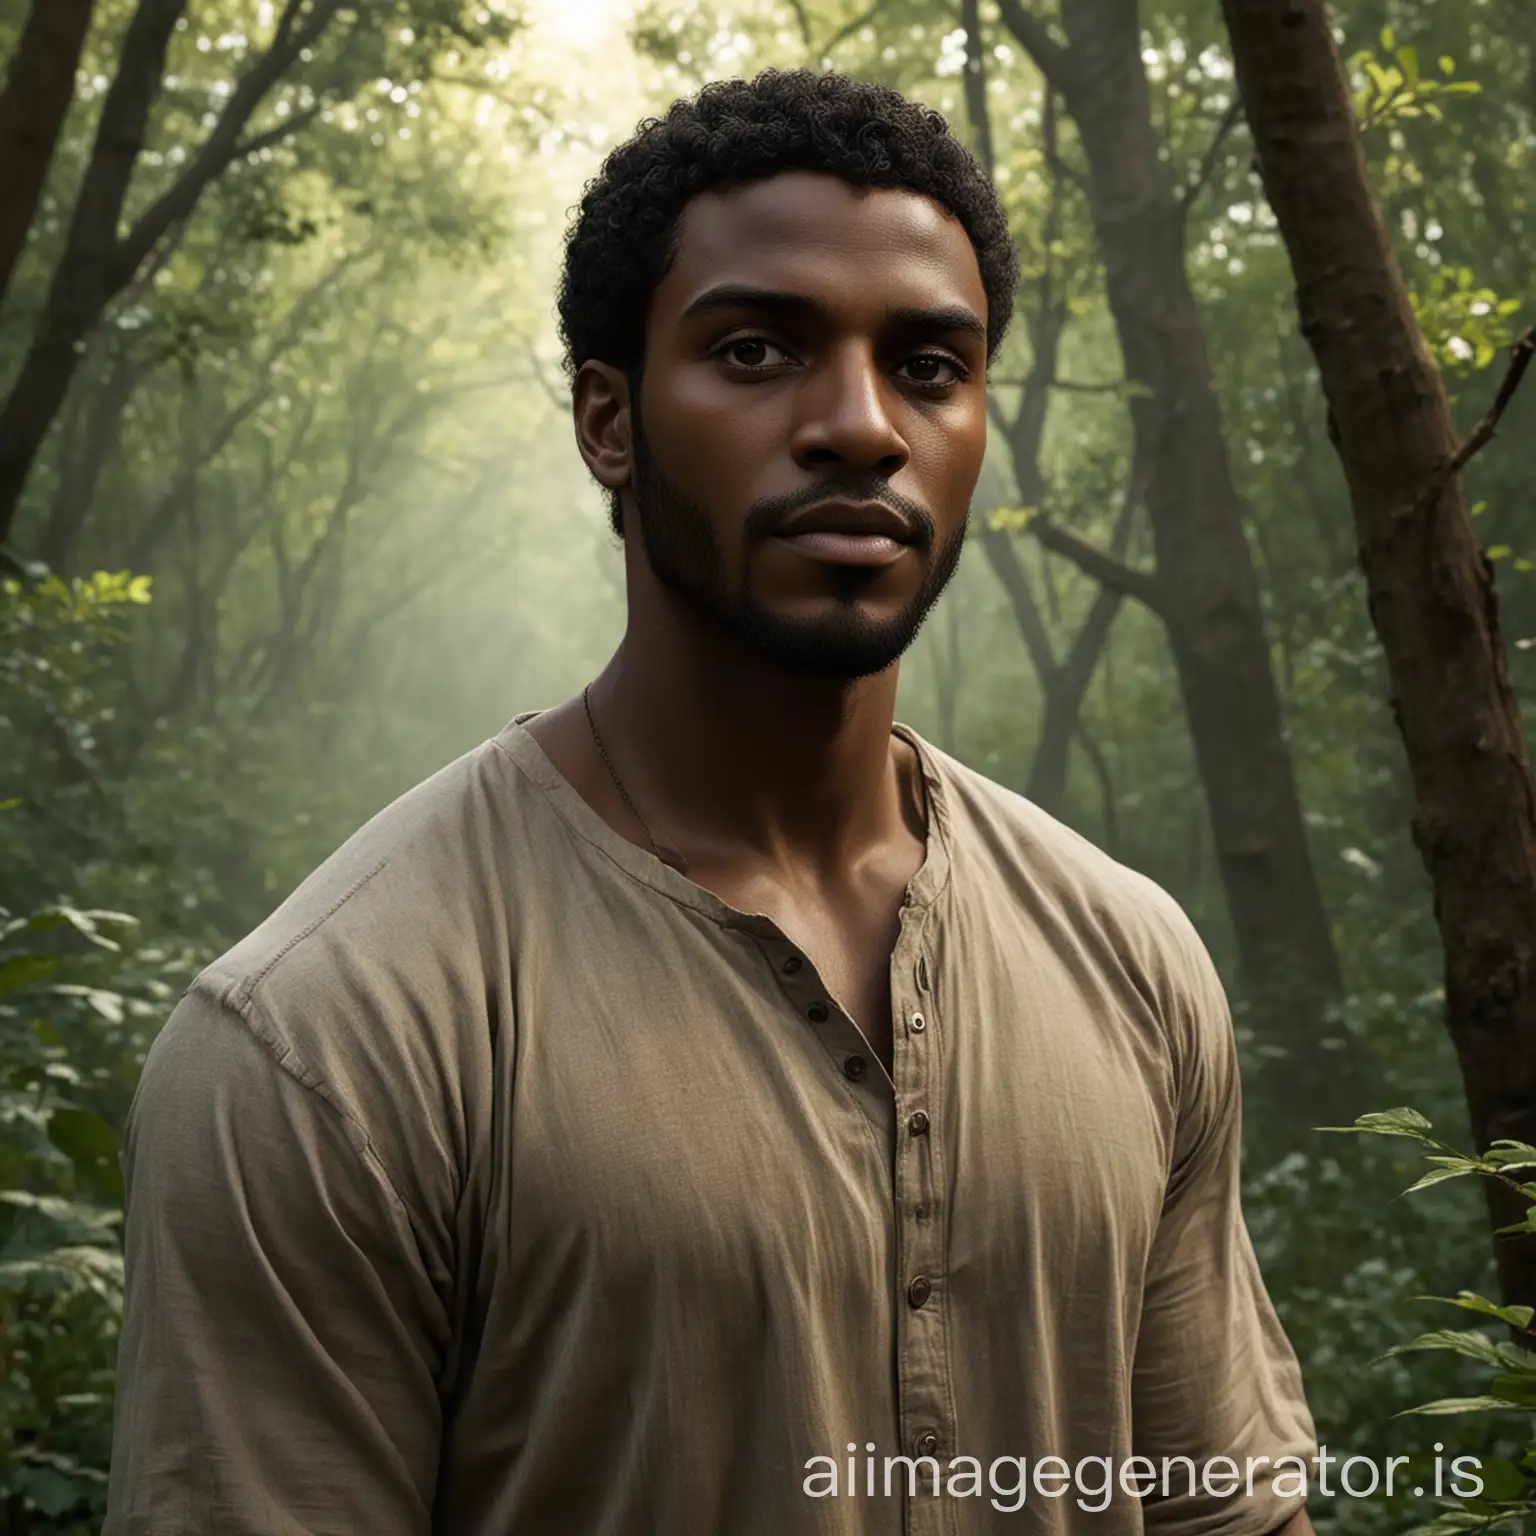 The main character is a black-skinned man named Malik, depicted as strong, resilient, and deeply connected to nature.